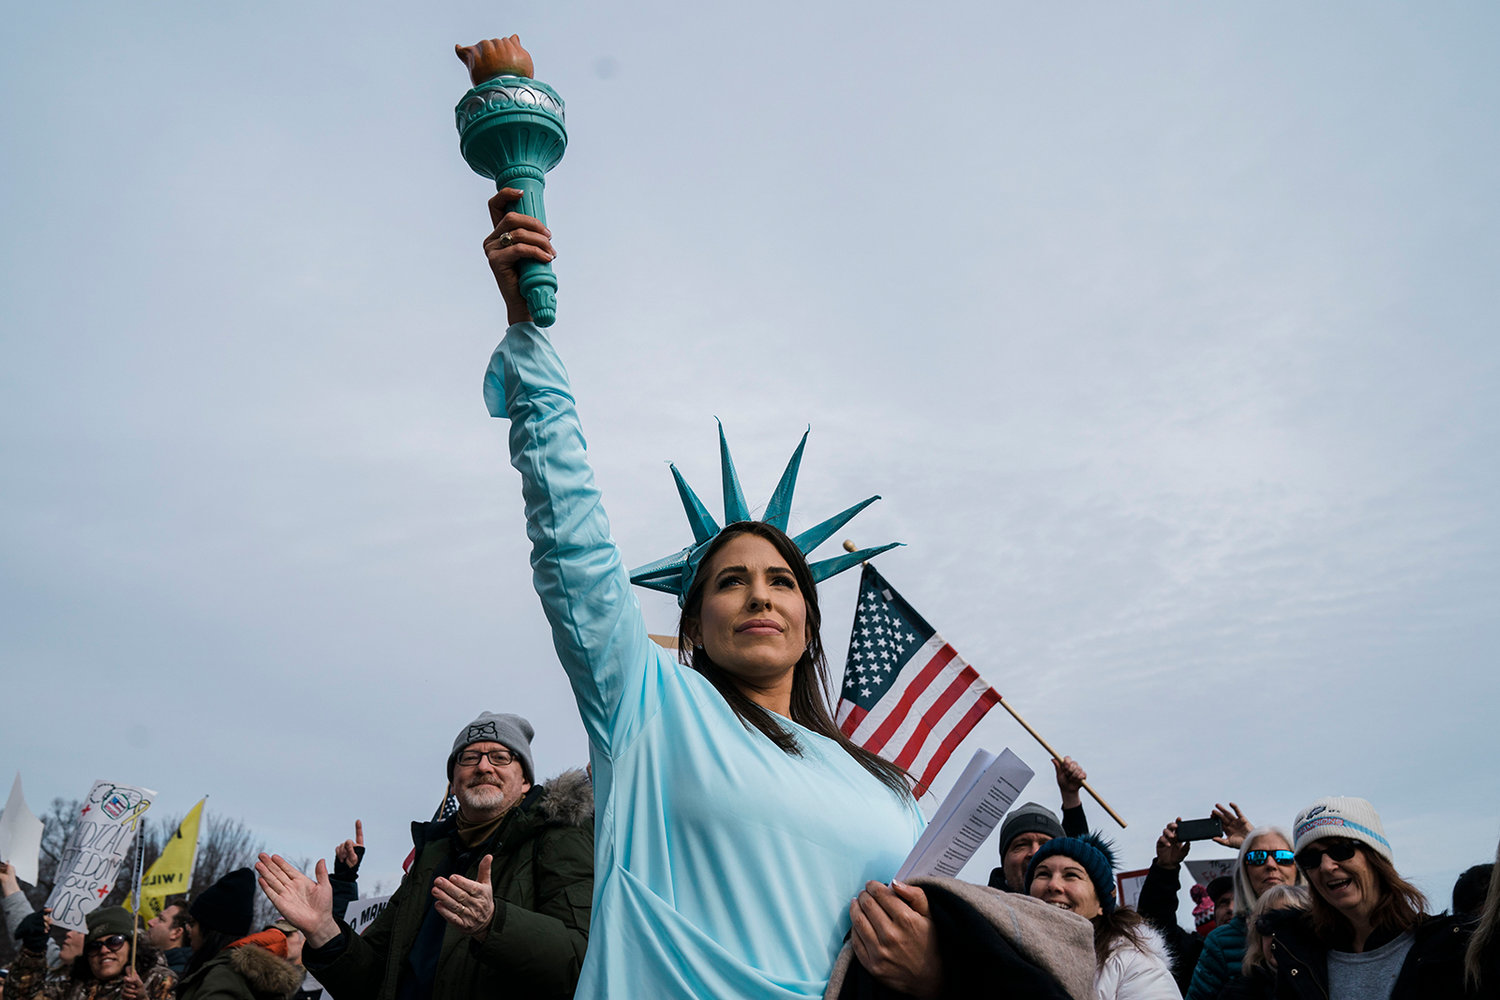 A woman dressed as the Statue of Liberty poses during a Defeat the Mandates Rally, on National Mall on Sunday, Jan. 23, 2022, in Washington, DC. Demonstrators are protesting mask and COVID-19 vaccination mandates. (Kent Nishimura/Los Angeles Times/TNS)